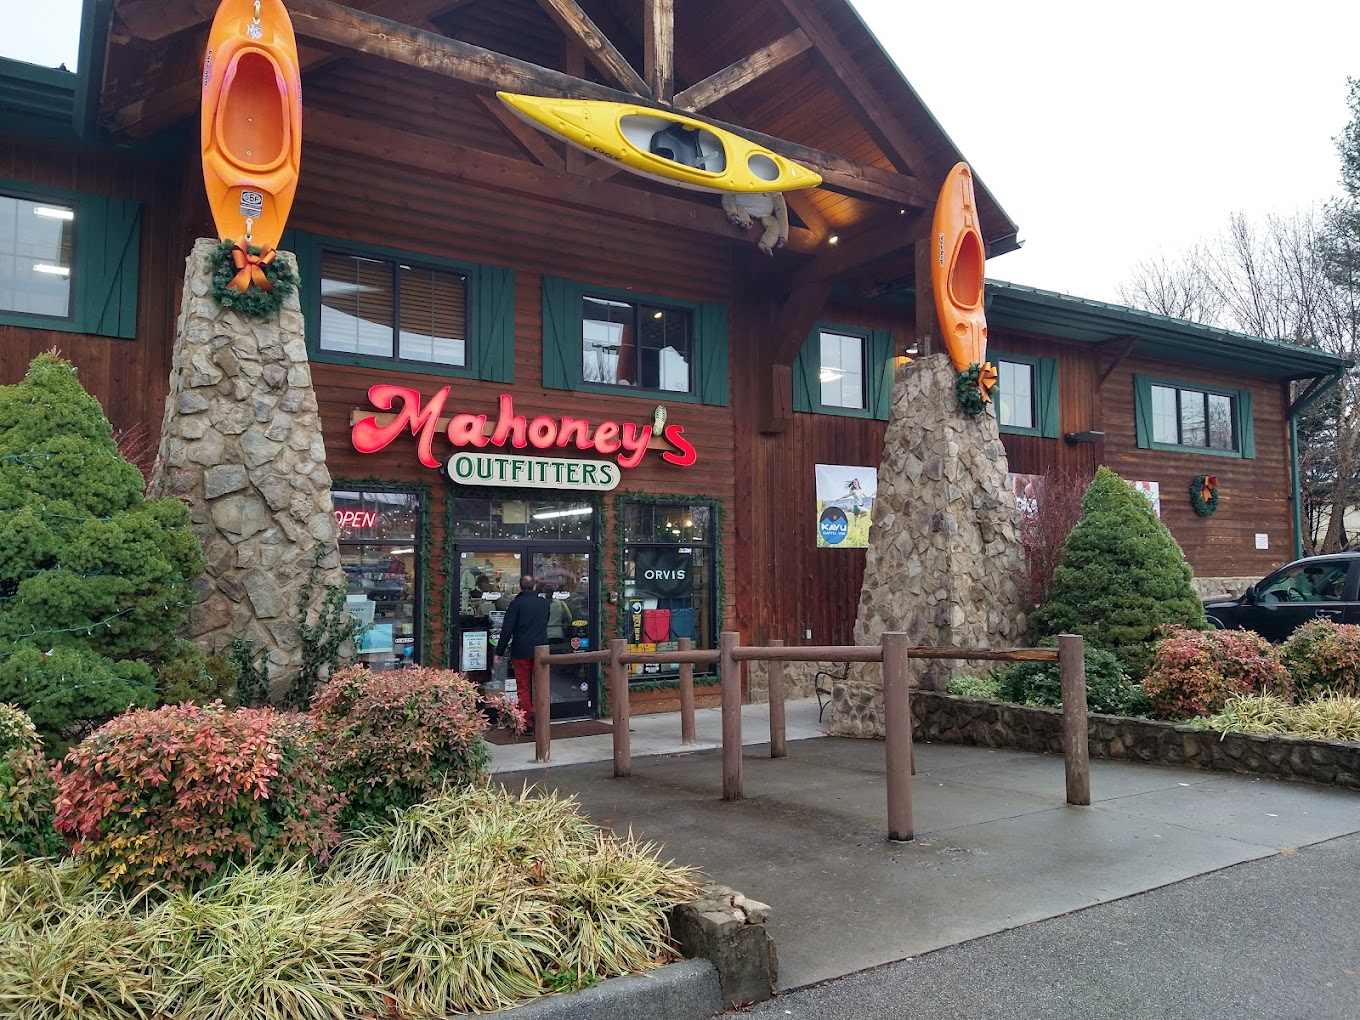 Mahoney’s Outfitters